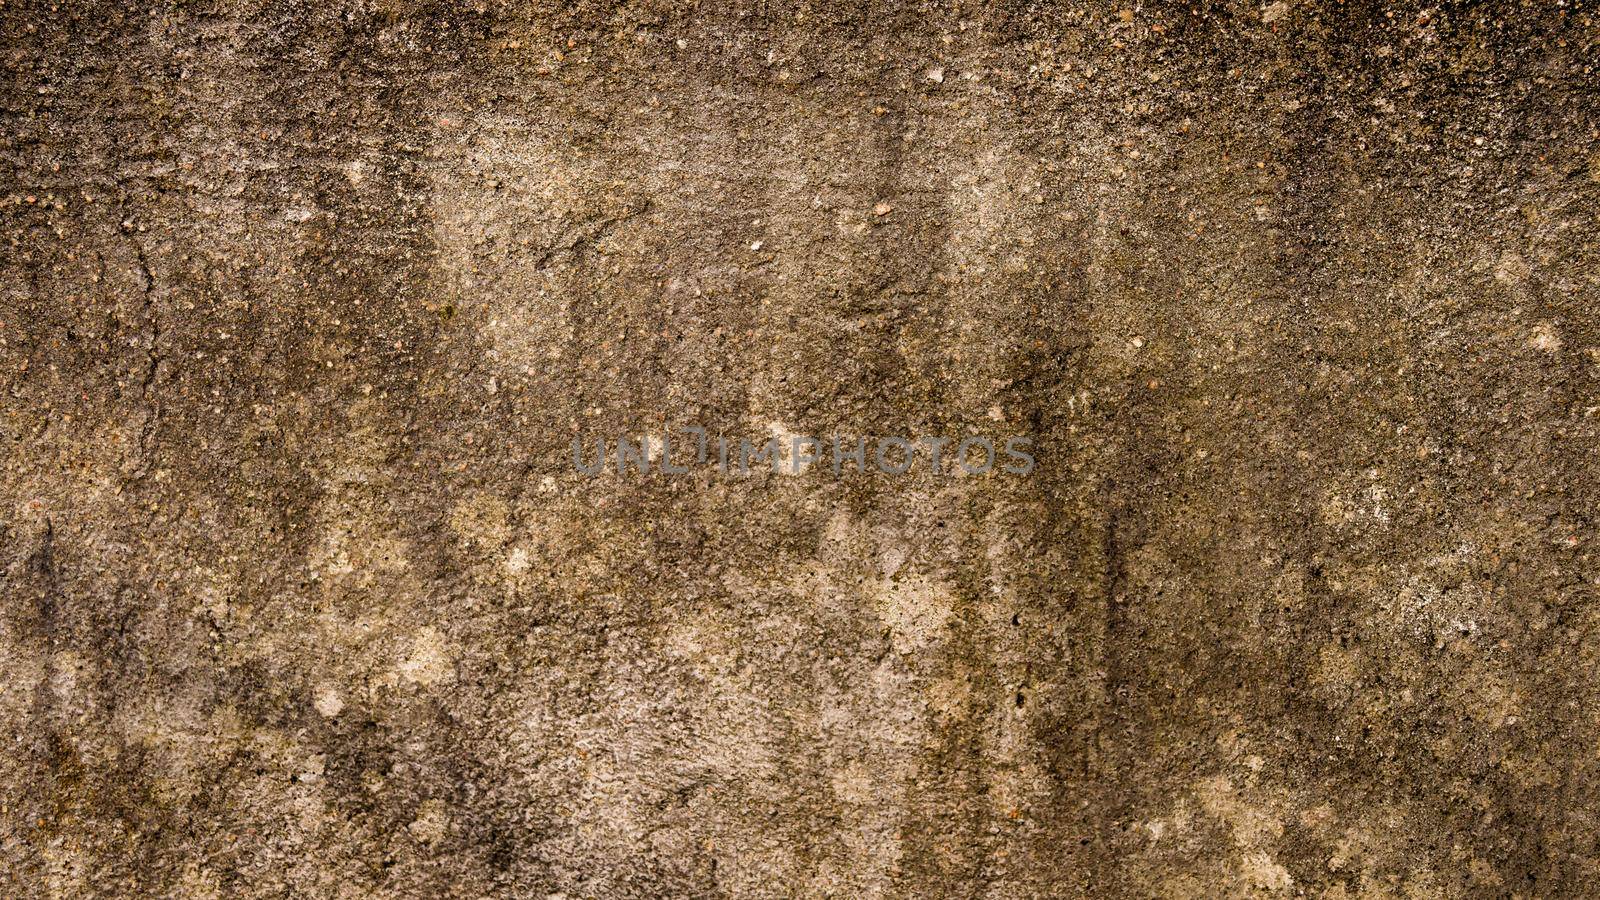 Moist Damp patch on Sand wall due to Rain penetration. Grunge crack moist concrete sand wall texture Pattern Background design element. Close up. Natural grungy color shade with minor uneven cracks. Sandy effects on building exterior plaster pillar.